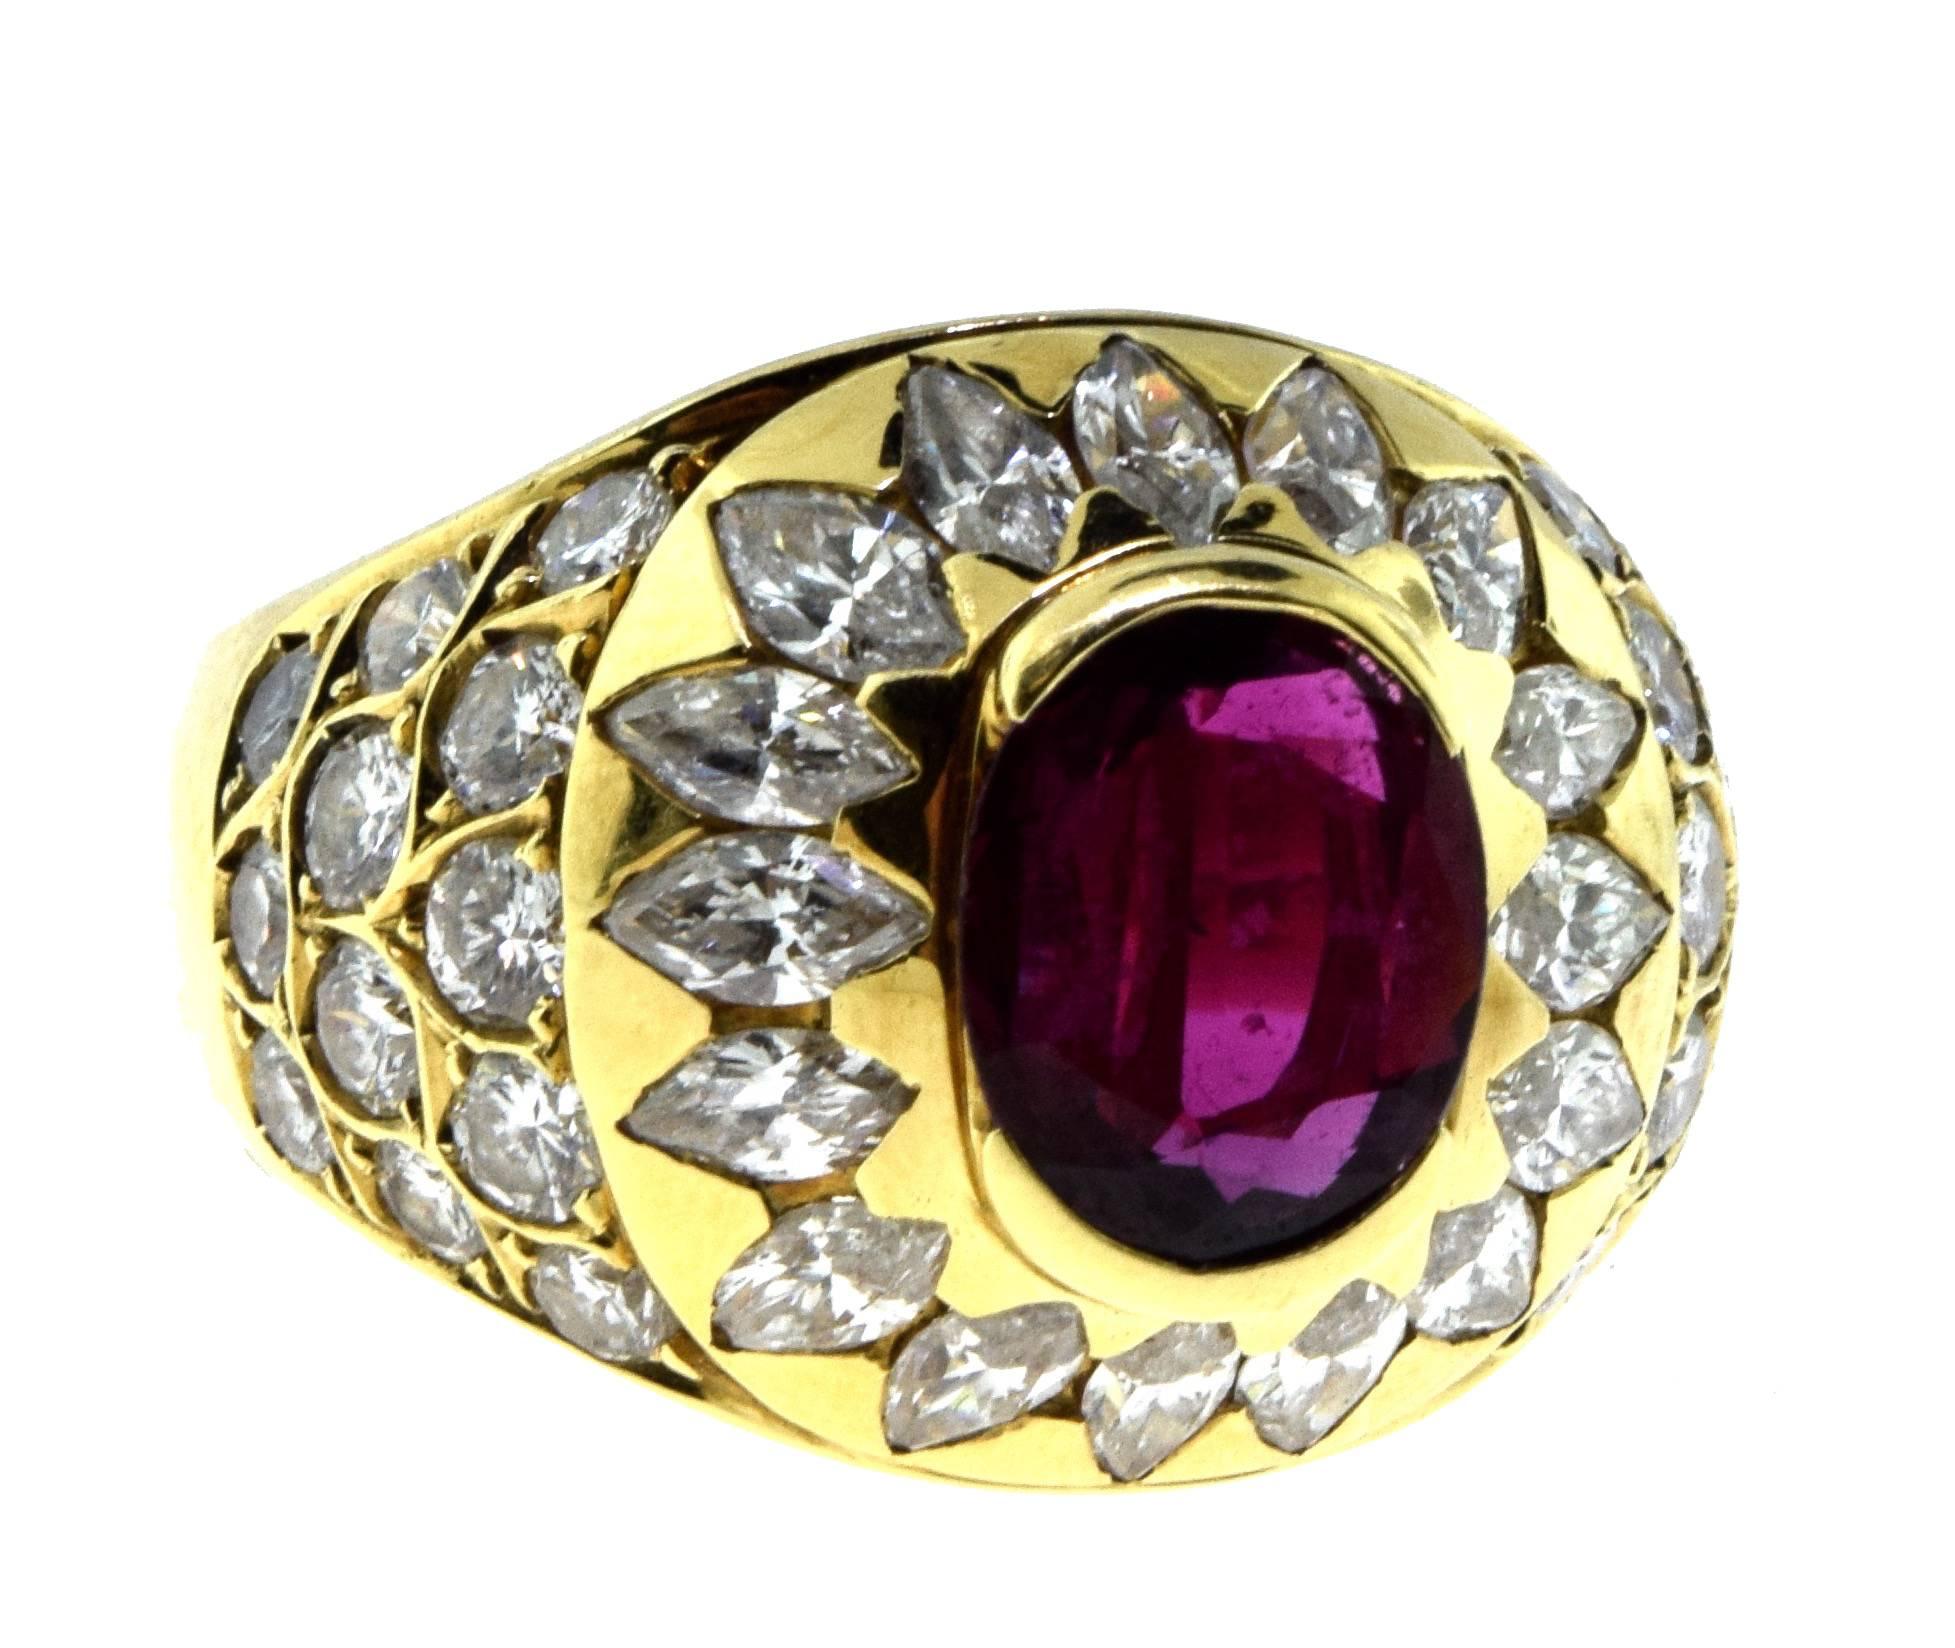 Ring Size: 8.25
Metal: Yellow Gold
Metal Purity: 18k
Stones: Ruby and Diamonds
Ruby Weight: 2 carat
Diamond Weight: 3 carat
Total Carat Weight: 5 carat
Total Item Weight (g): 13.3

The timeless brilliance of this ruby and diamond ring—whether for a